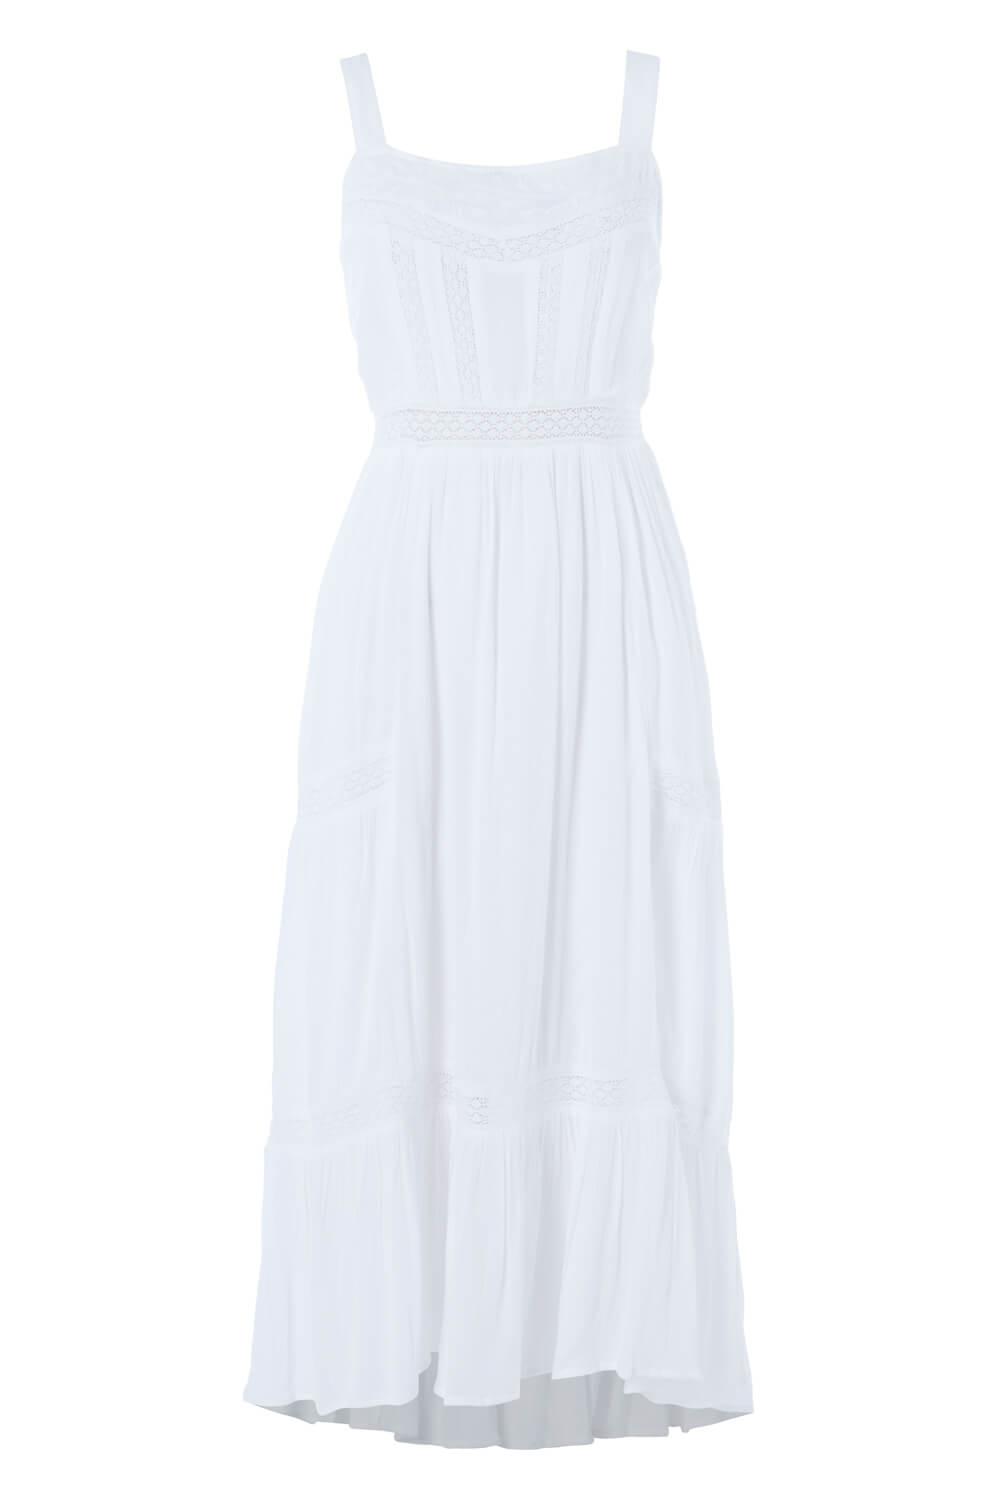 White Ladder Lace Tiered Maxi Dress, Image 4 of 4